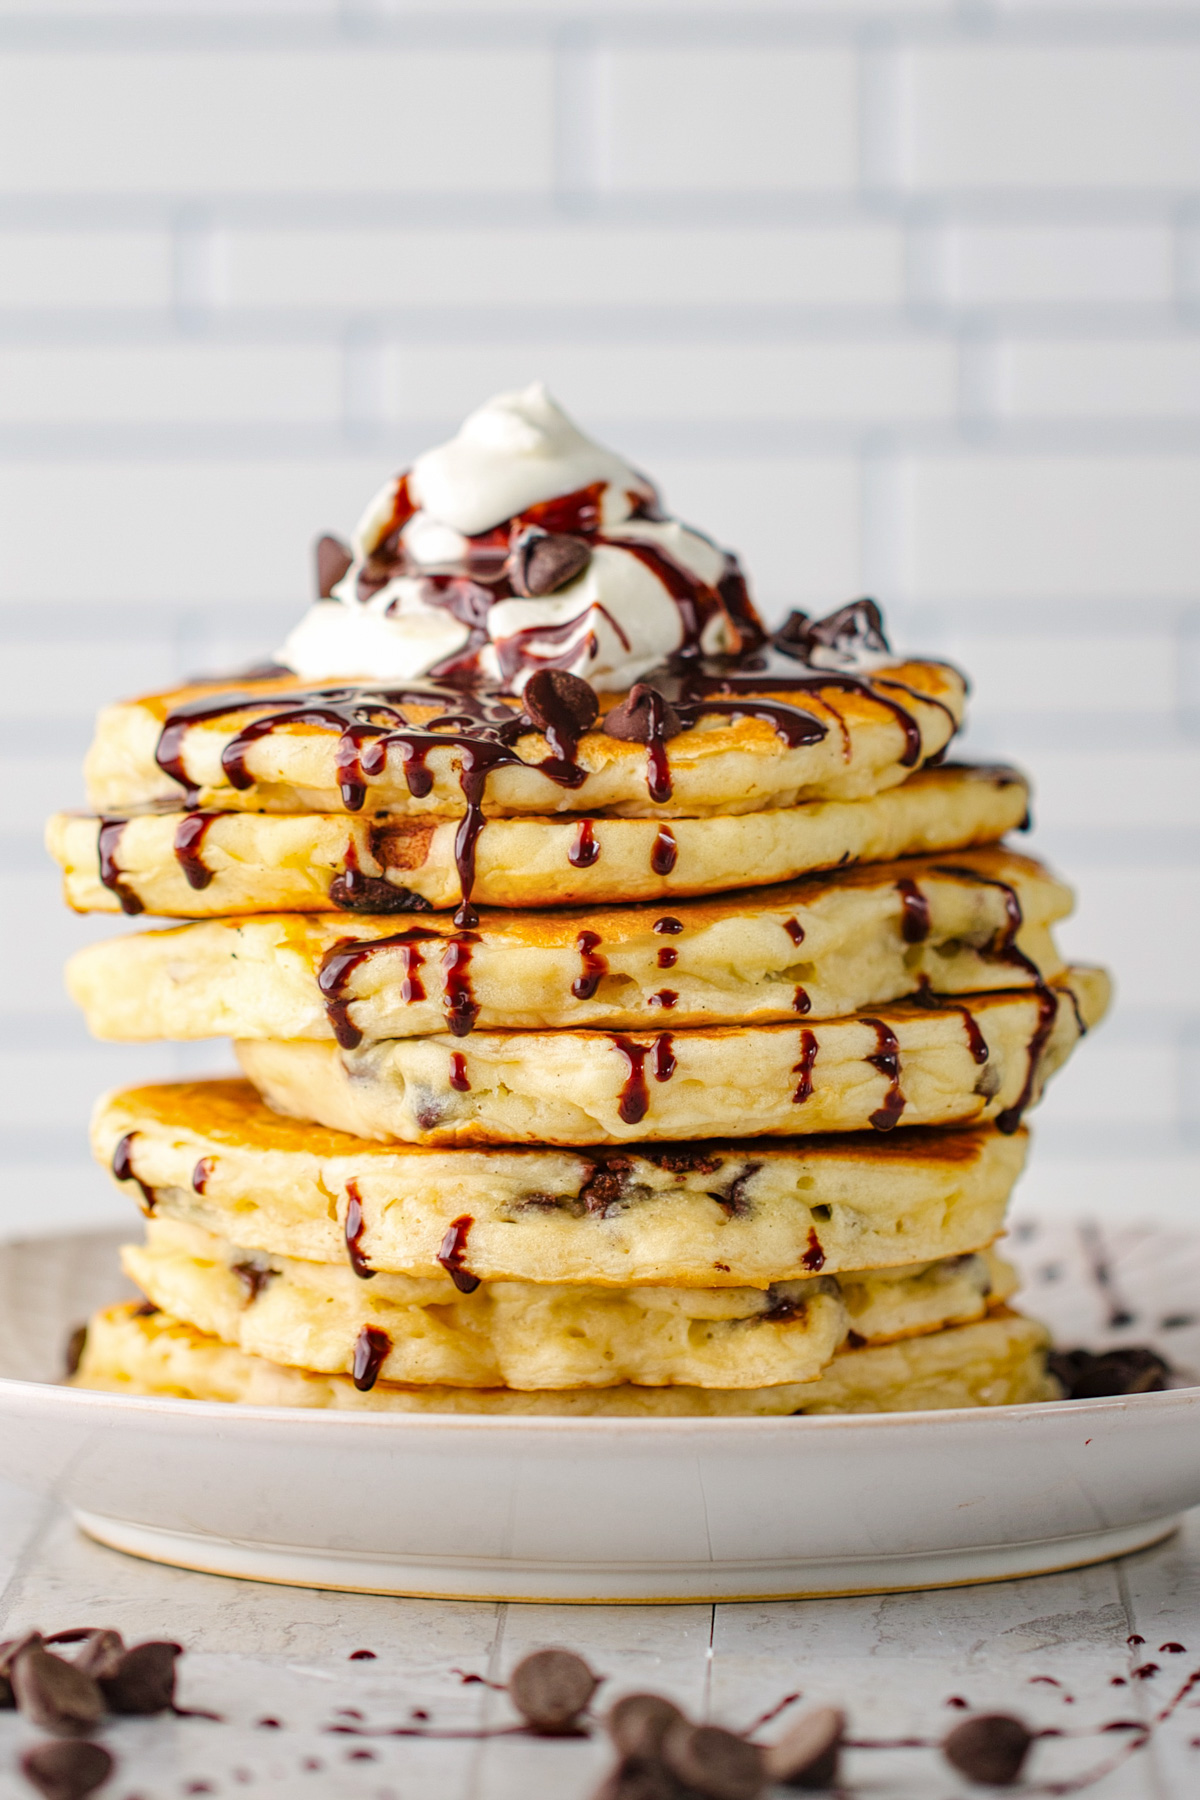 A stock of chocolate chip pancakes topped with whipped cream, with chocolate sauce drizzled over the top and down the sides of the pancakes.